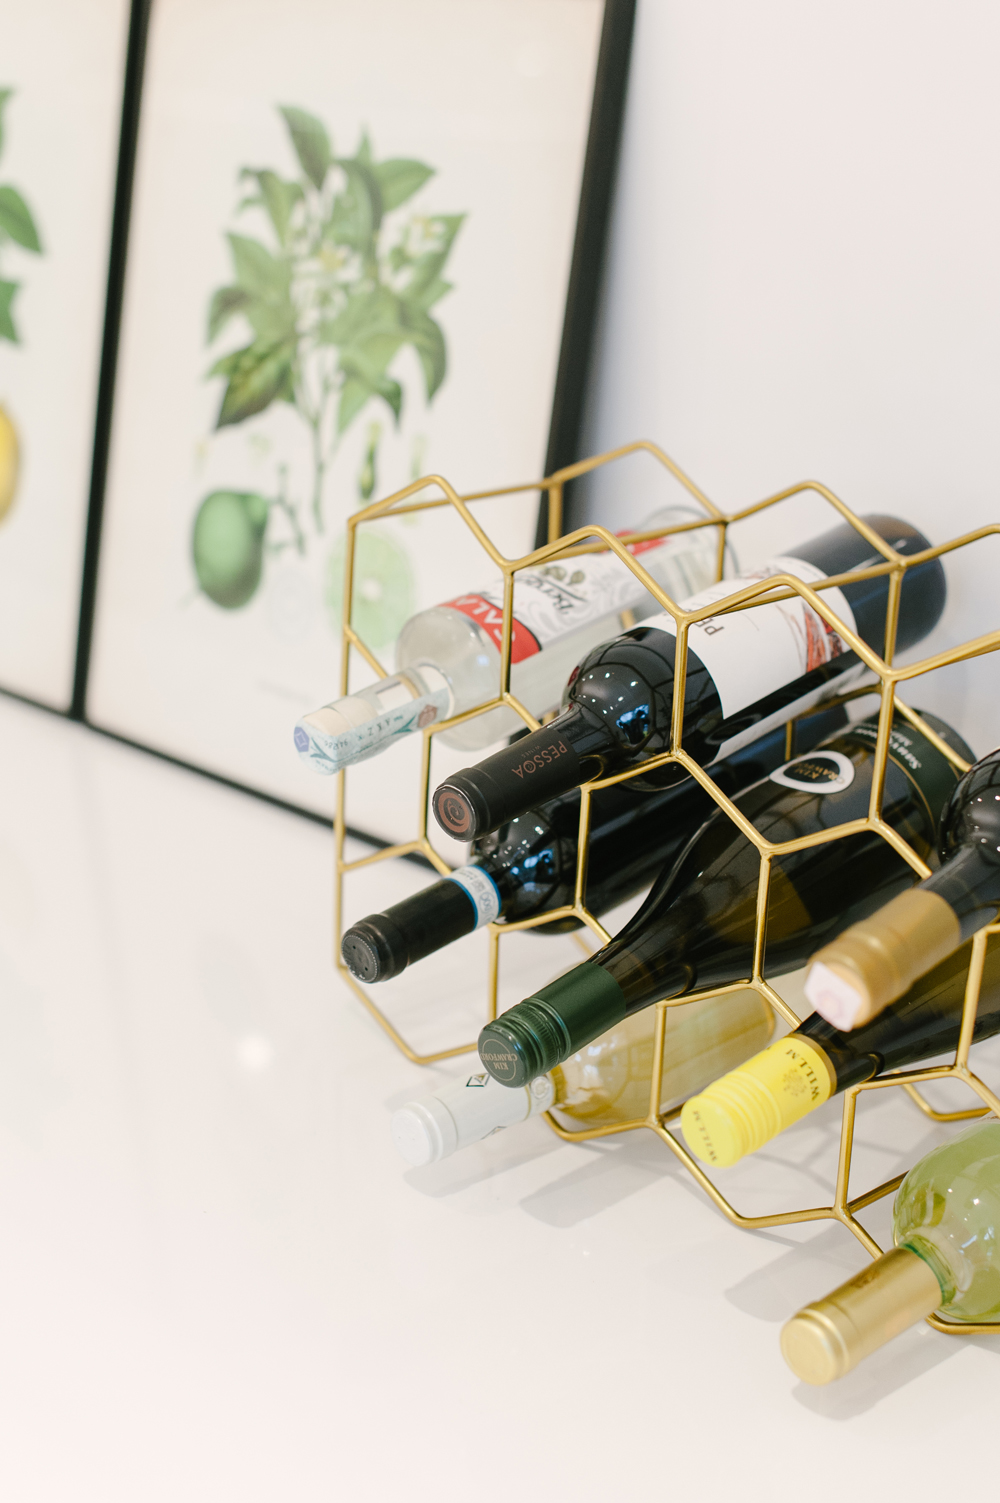 A simple yet artful gold honeycomb wine holder